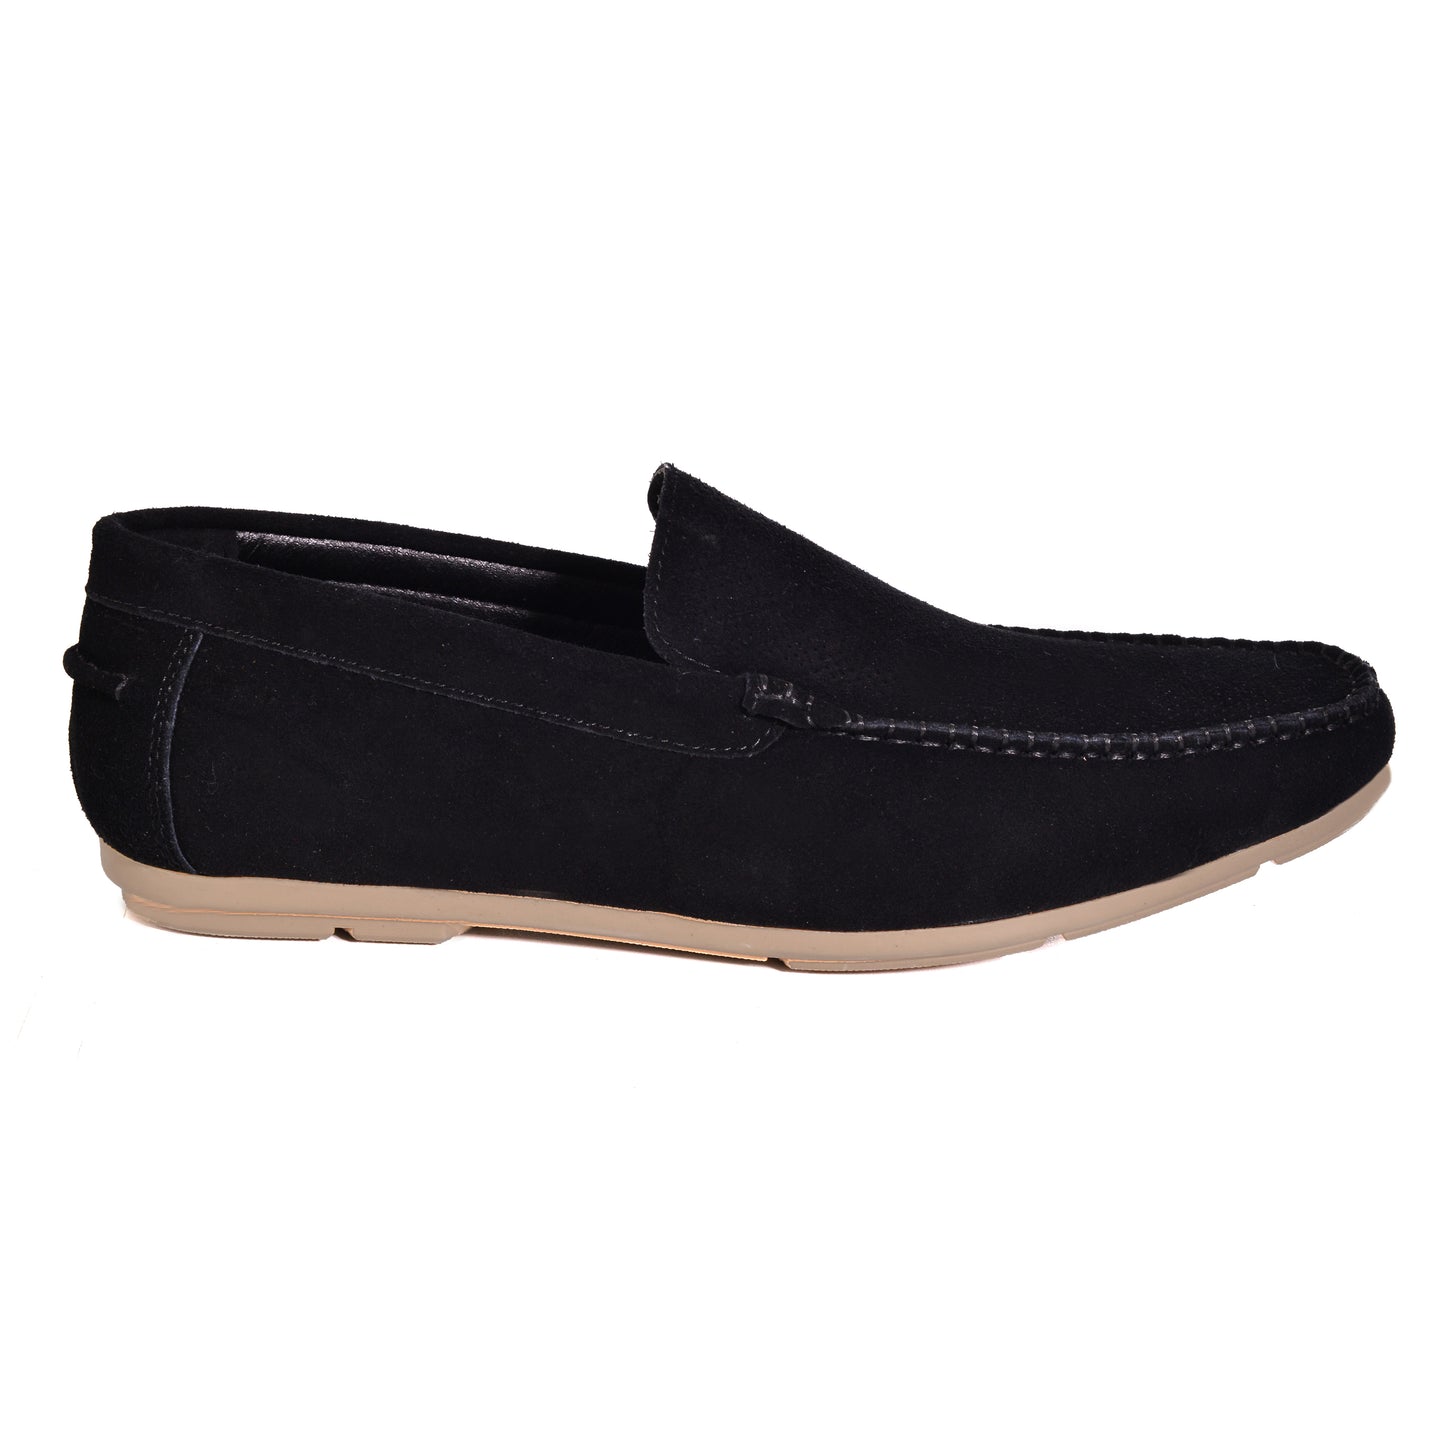 2H #JX20-1 Black Chamois Texture Loafer Moccasin